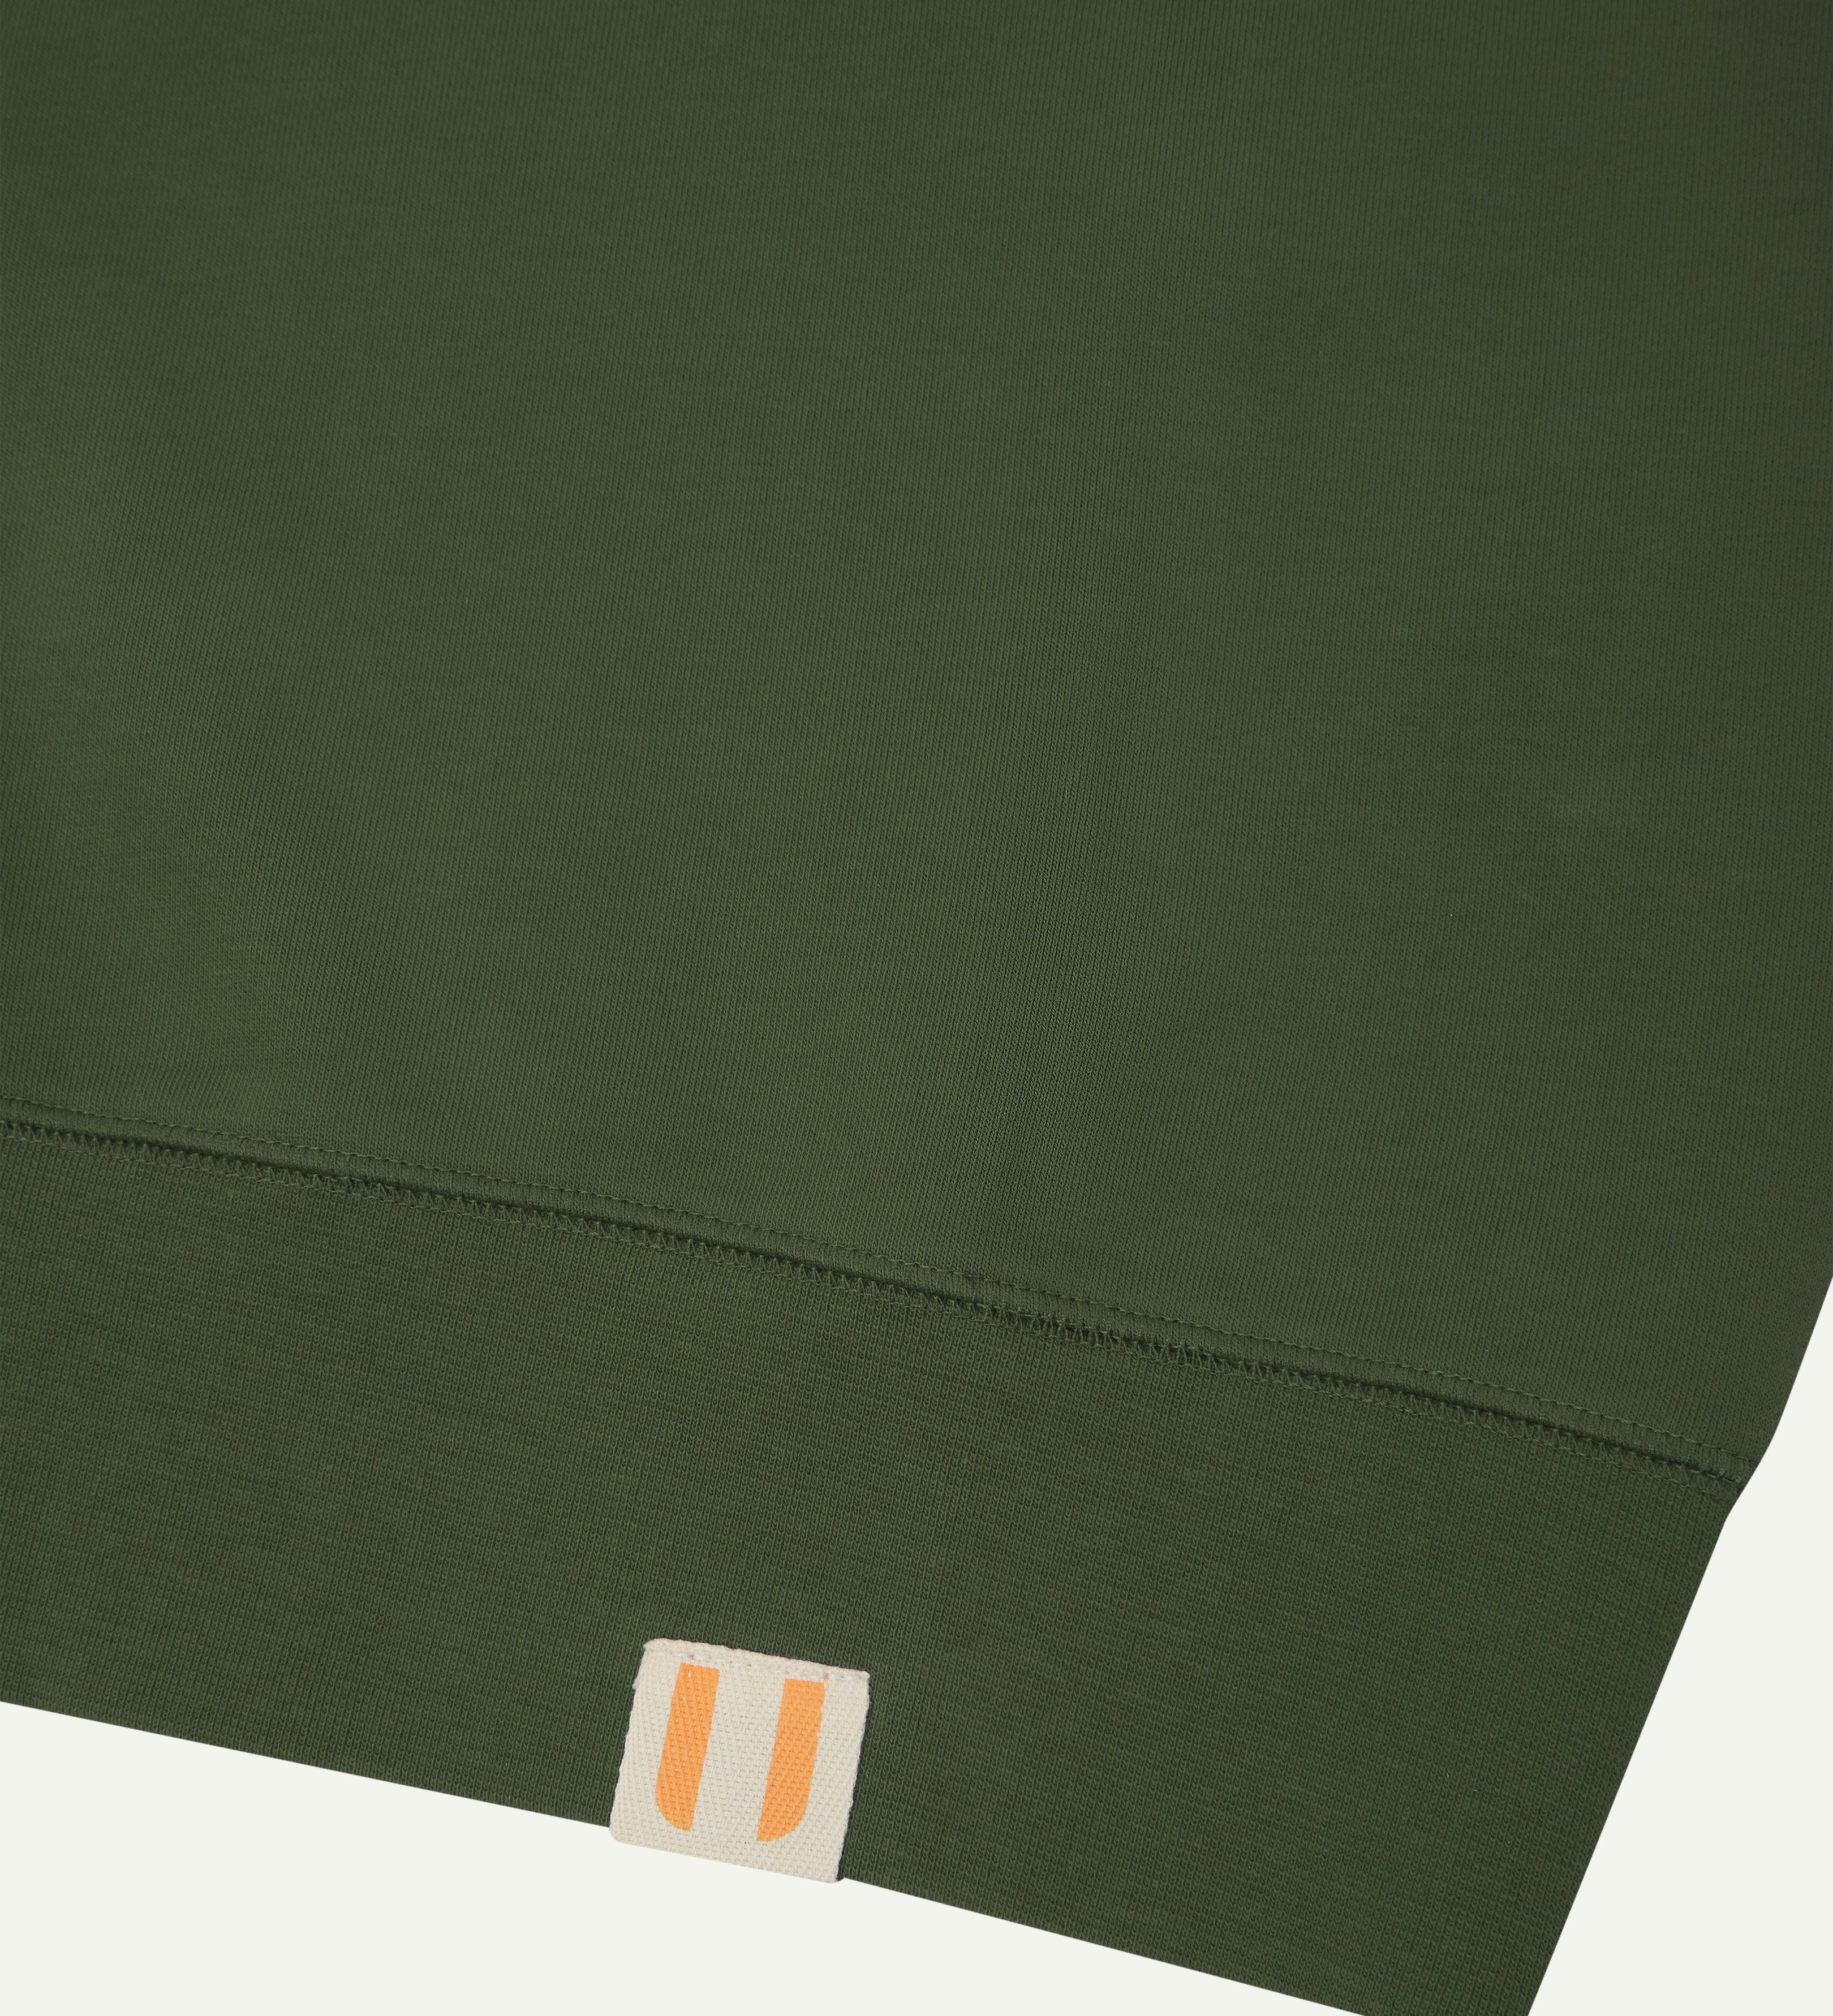 Close-up view of vine green organic heavyweight cotton #7005 jersey sweatshirt by Uskees showing brand logo at hem.